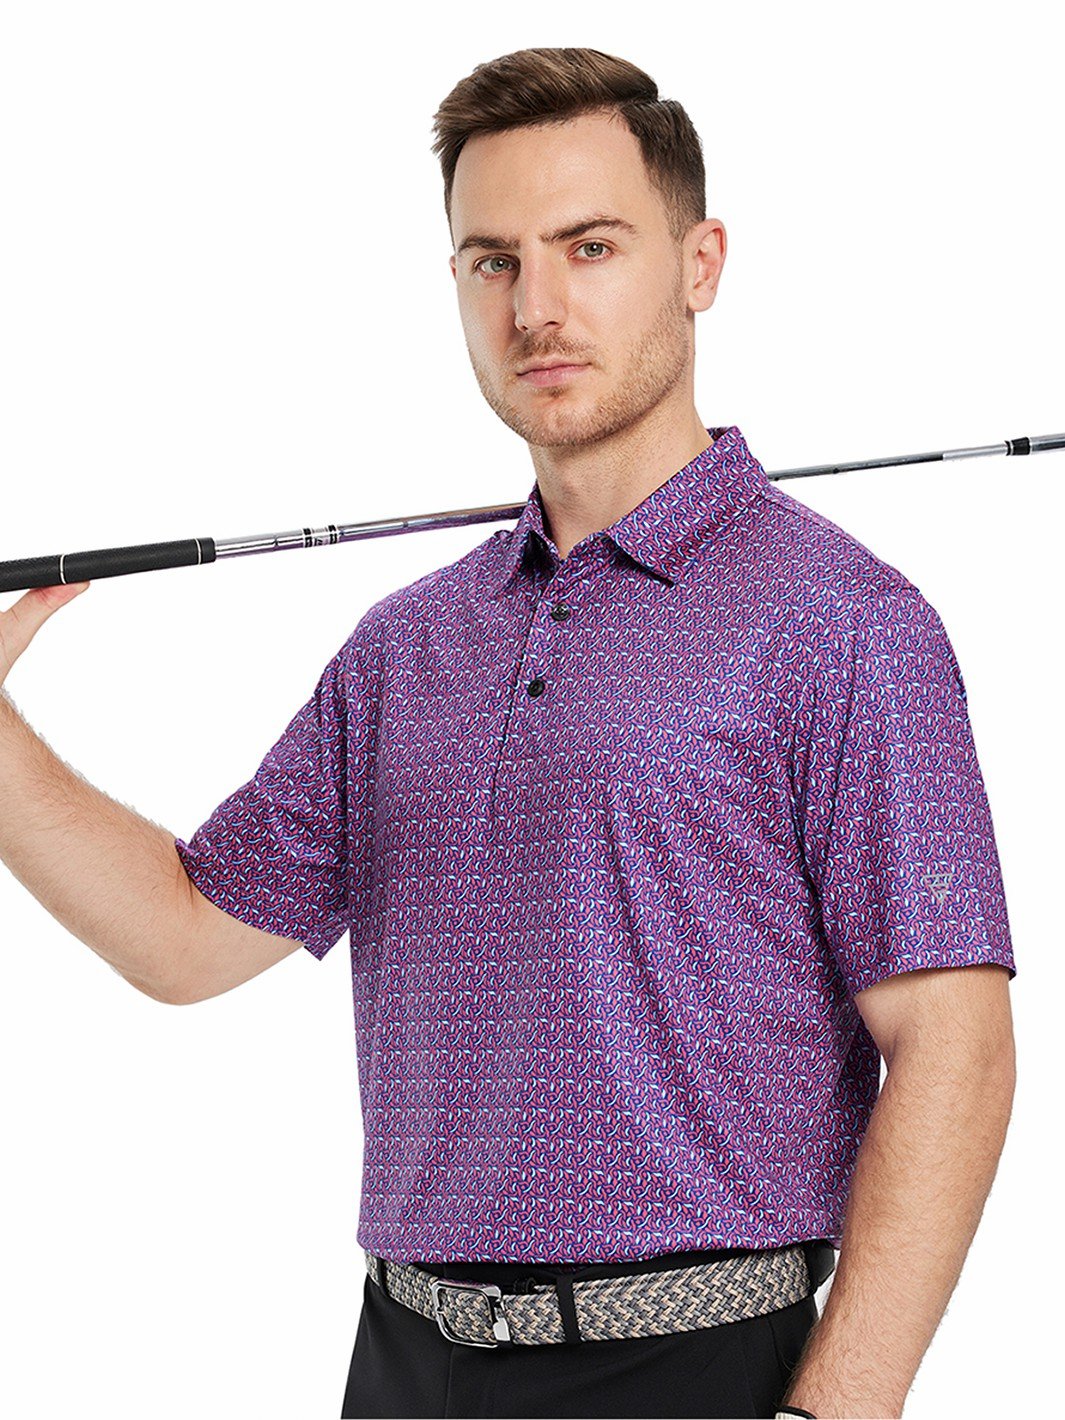 Men's Printed Dry Fit Moisture Wicking Lightweight Golf Polo Shirts ...